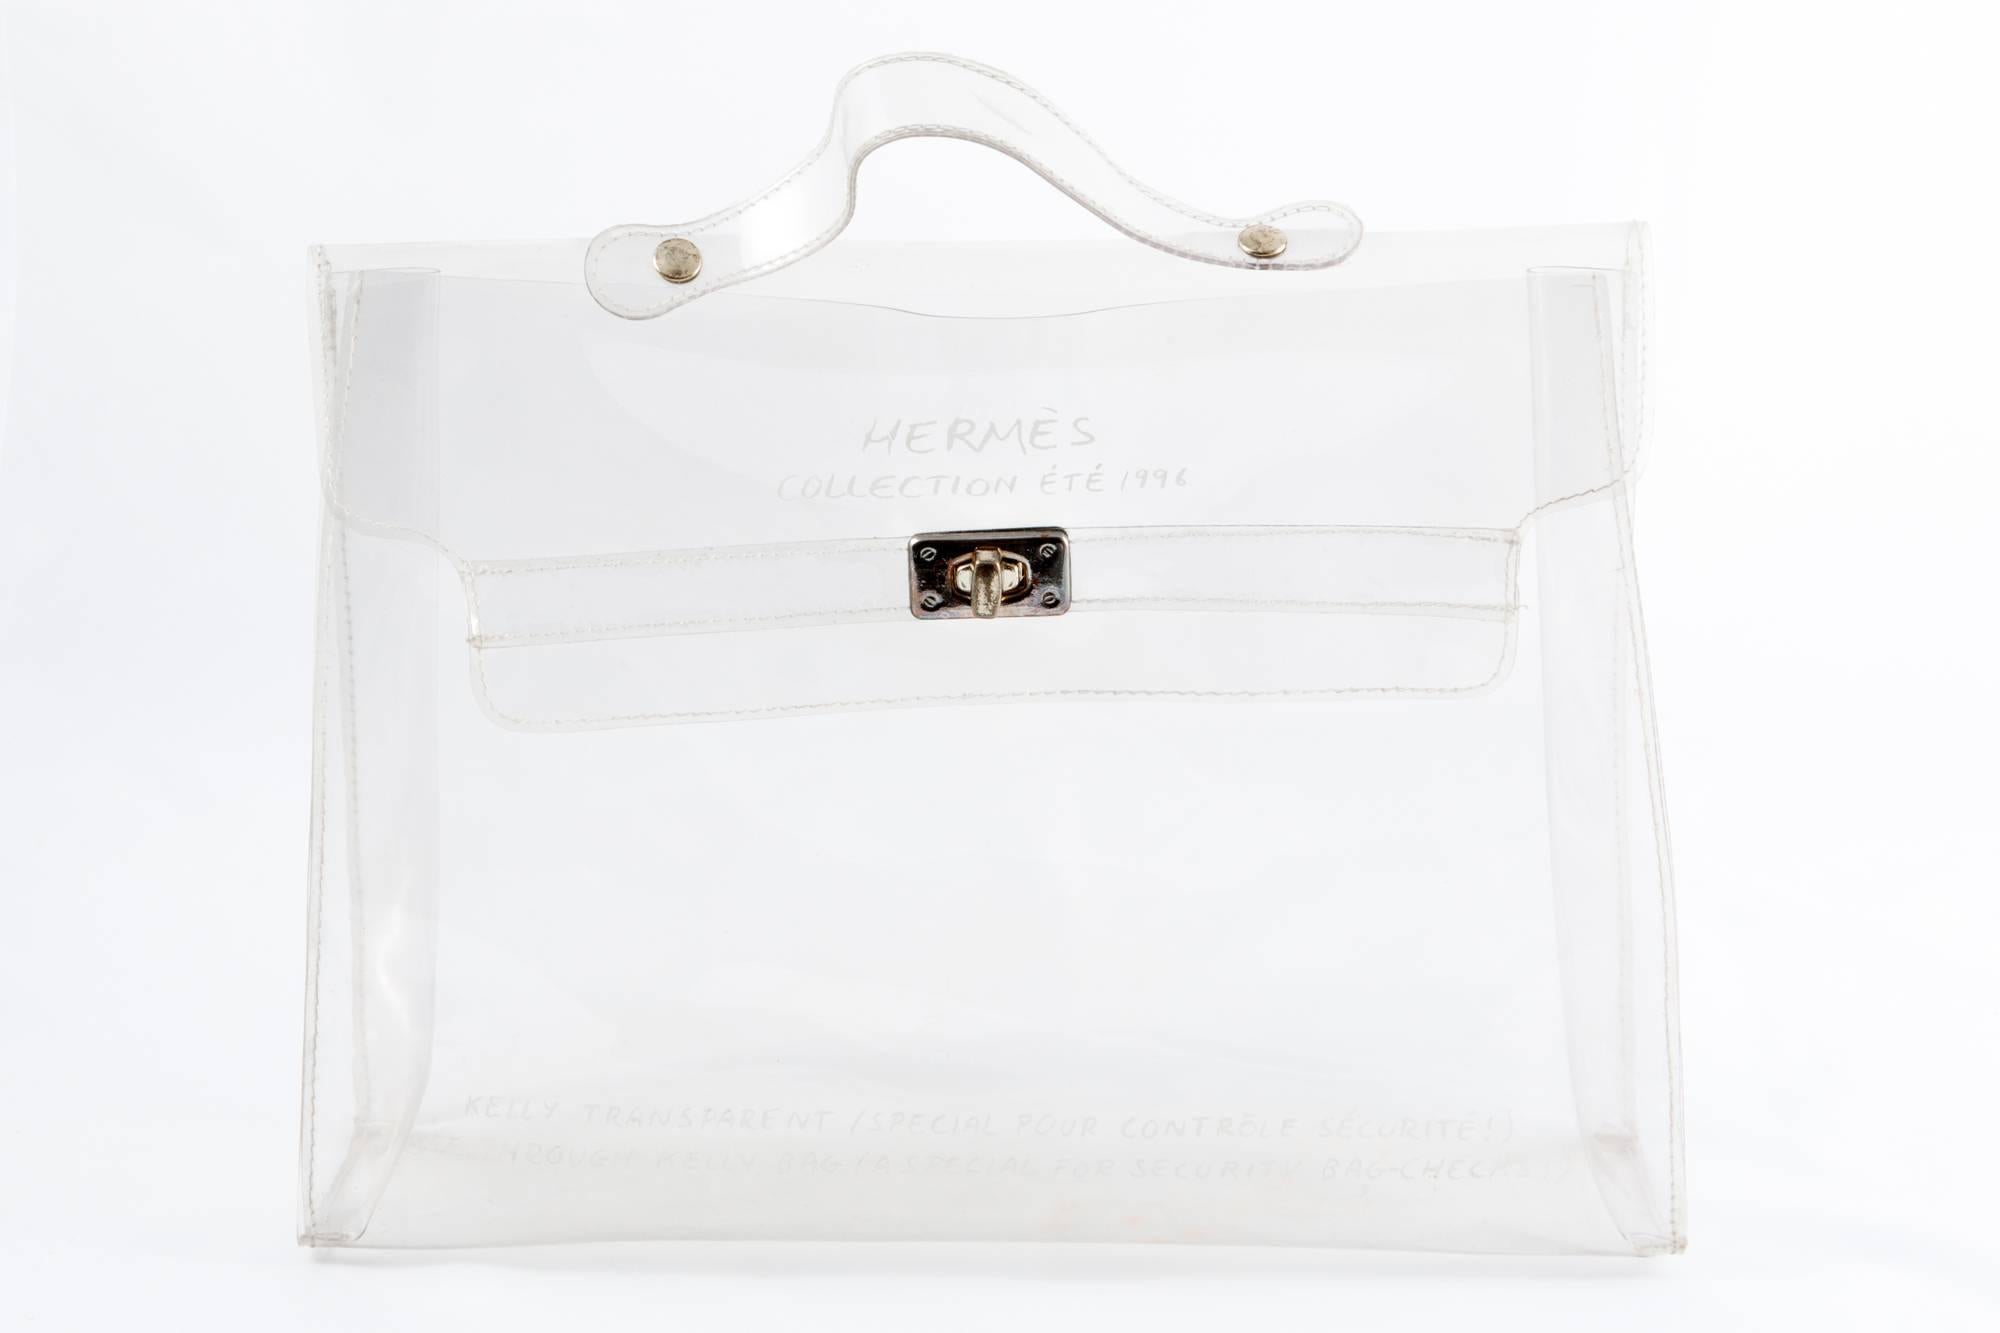  1996s Collector Hermes transparent plastic bag shaped as a Kelly bag featuring an hardware in gilt silver tone metal, simple handle in transparent vinyl allowing the bag to be worn in the hand. A special bag for security-check.
In good vintage